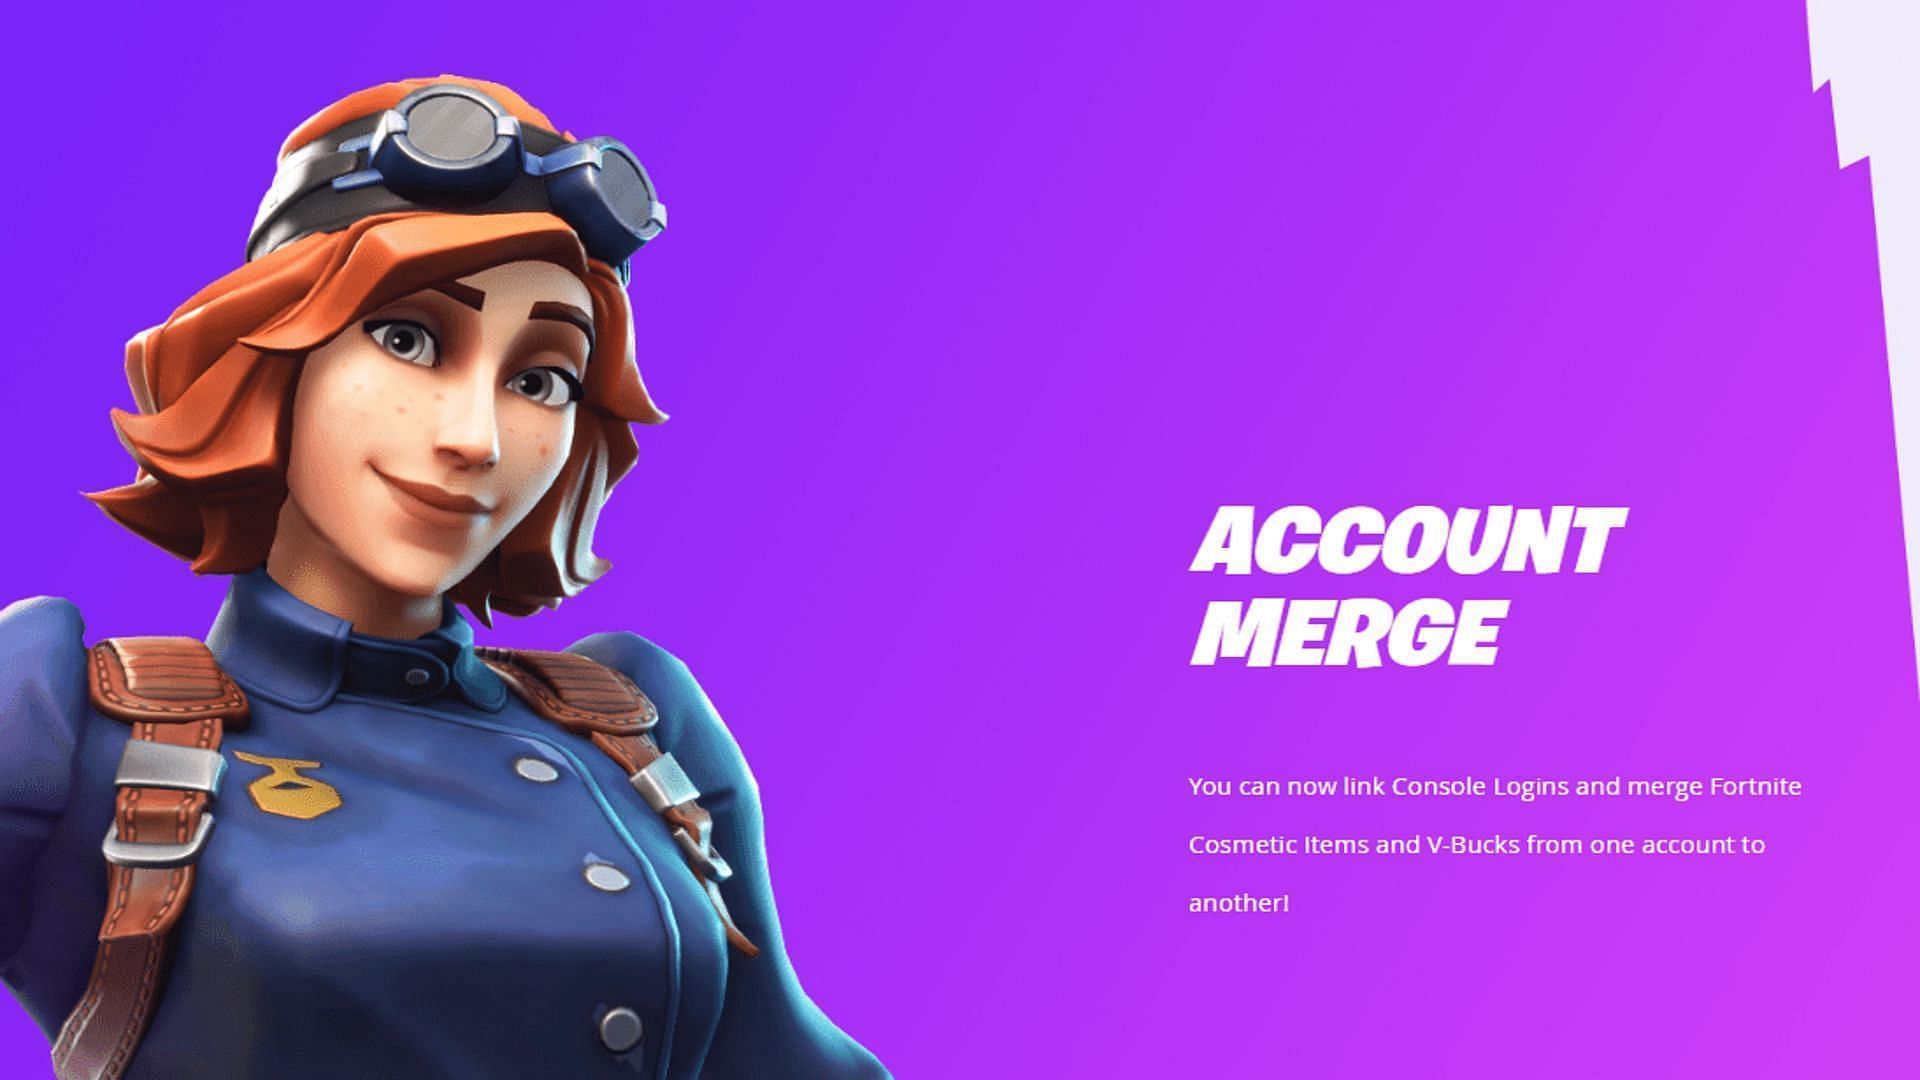 Account Merging was removed from Fortnite over two years back, and the community is still wondering if it will ever make a comeback (Image via Epic Games)